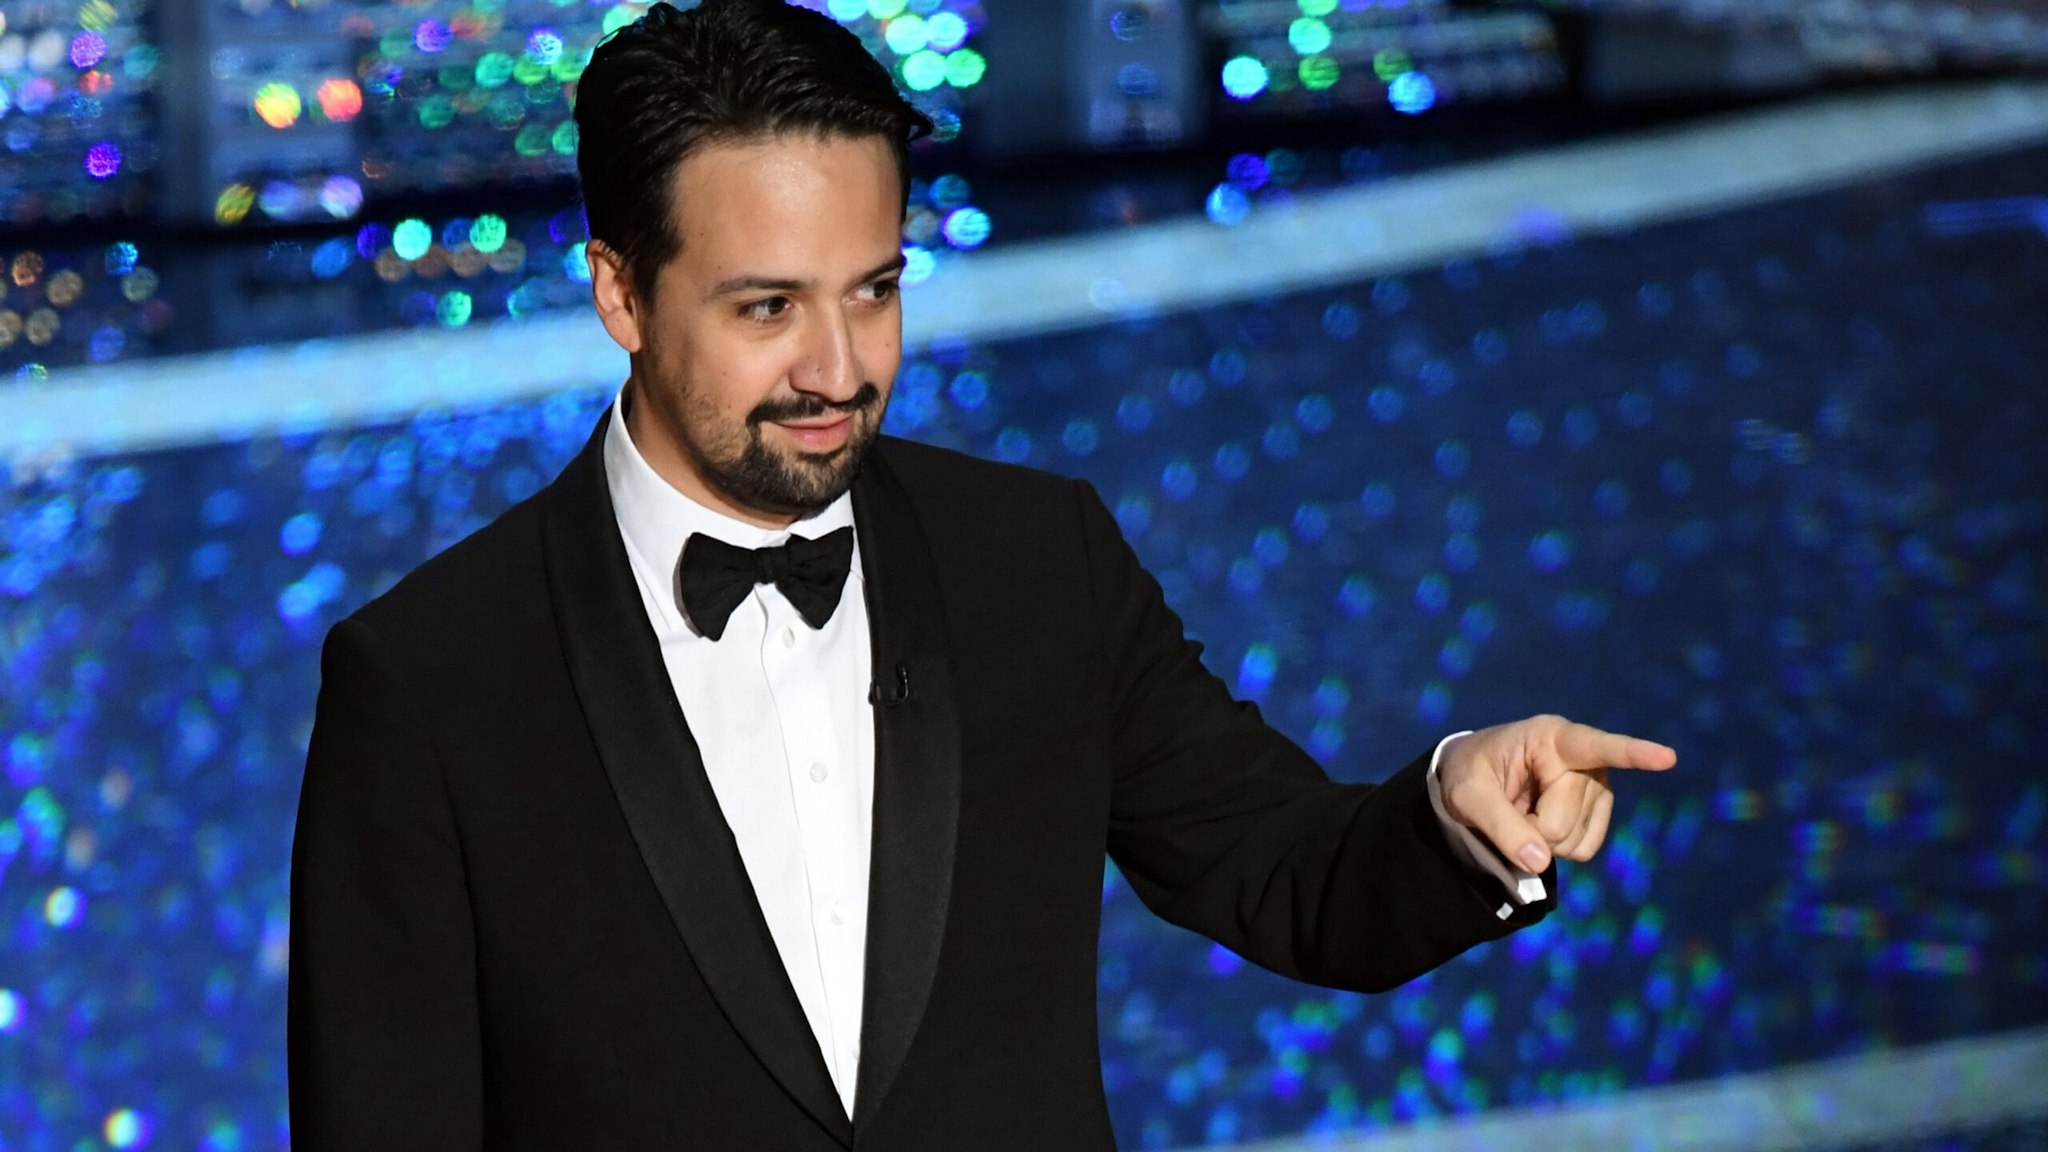 HOLLYWOOD, CALIFORNIA - FEBRUARY 09: Lin-Manuel Miranda speaks onstage during the 92nd Annual Academy Awards at Dolby Theatre on February 09, 2020 in Hollywood, California. (Photo by Kevin Winter/Getty Images)